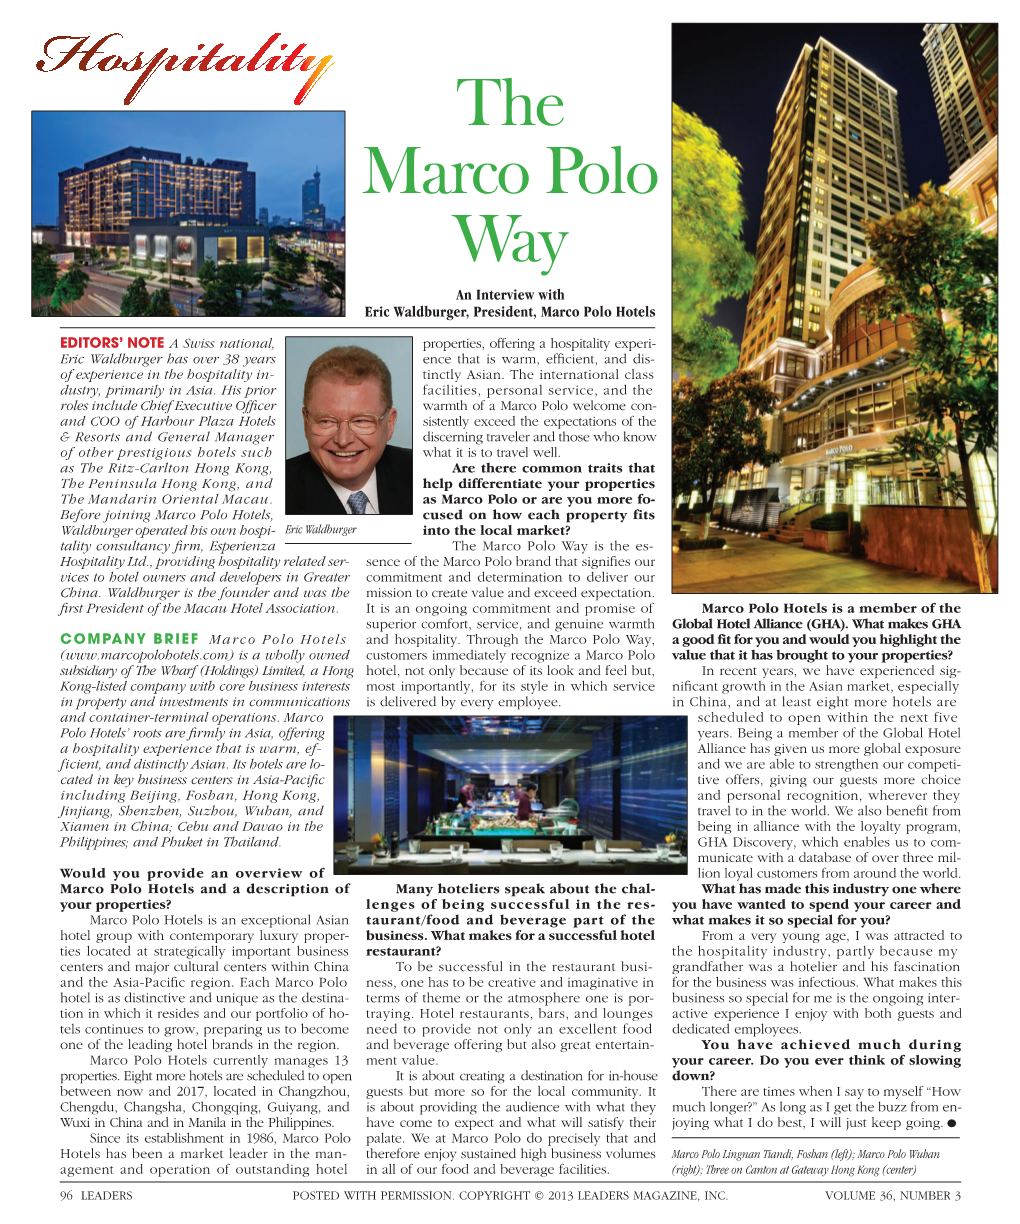 The Marco Polo Way an Interview with Eric Waldburger, President, Marco Polo Hotels